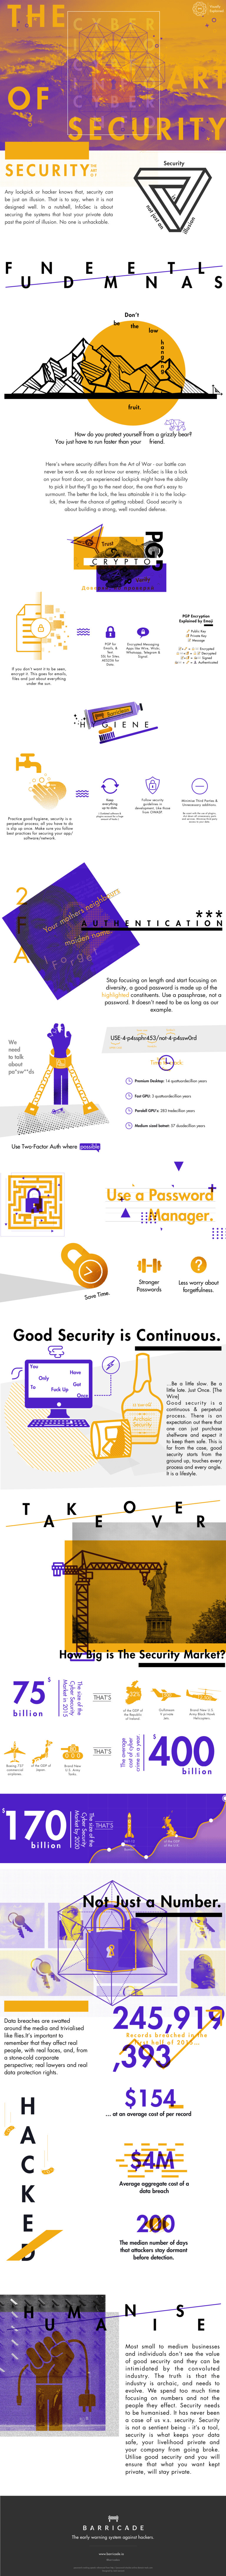 The-Art-of-Security-min